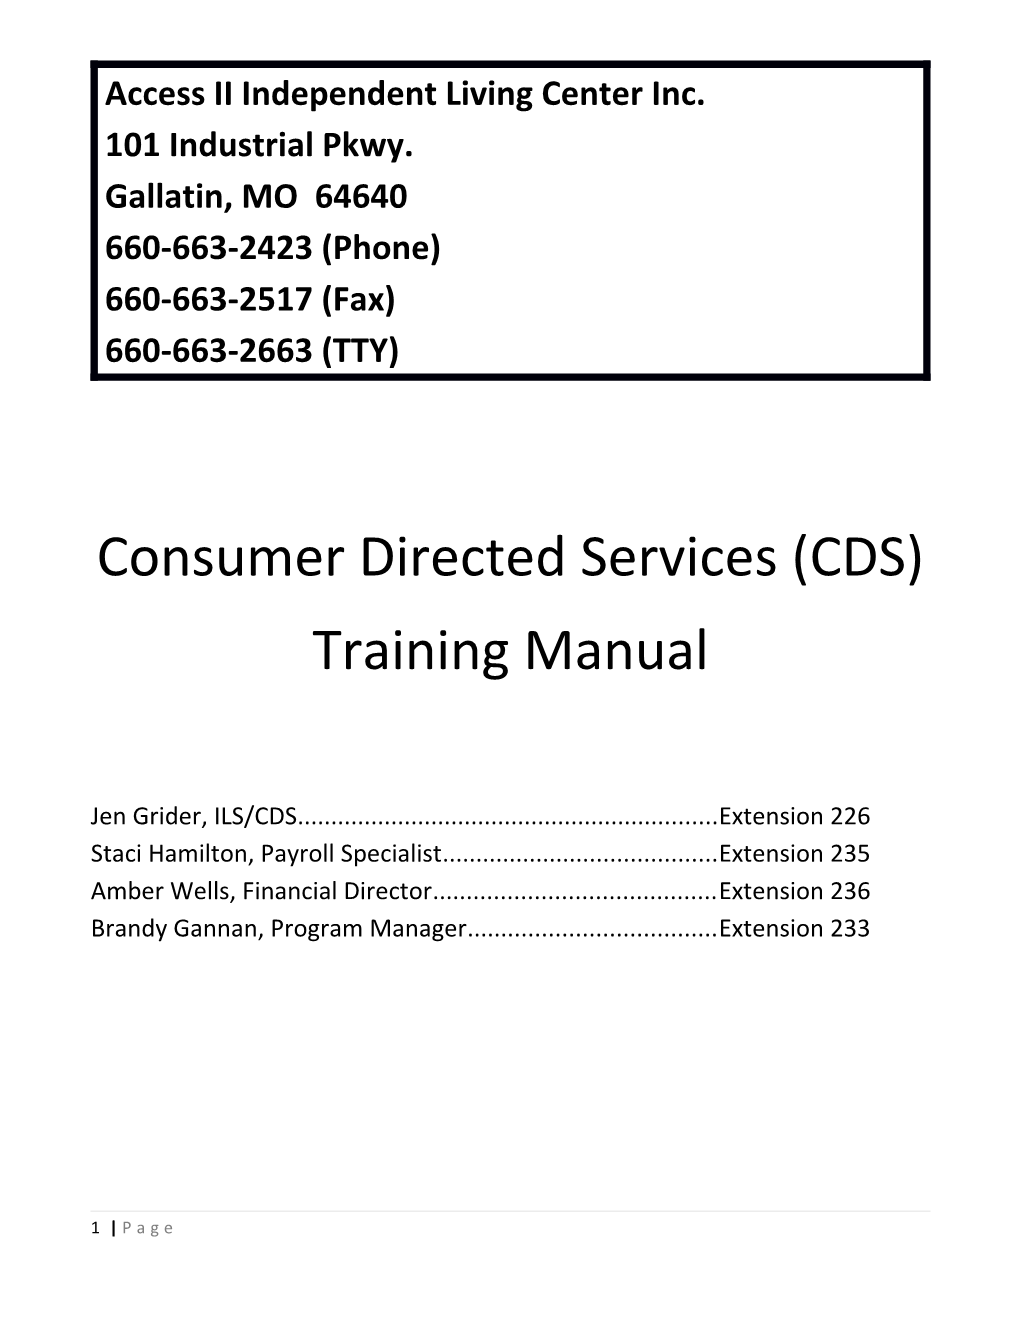 Access II Independent Living Center Inc. CDS Training Manual